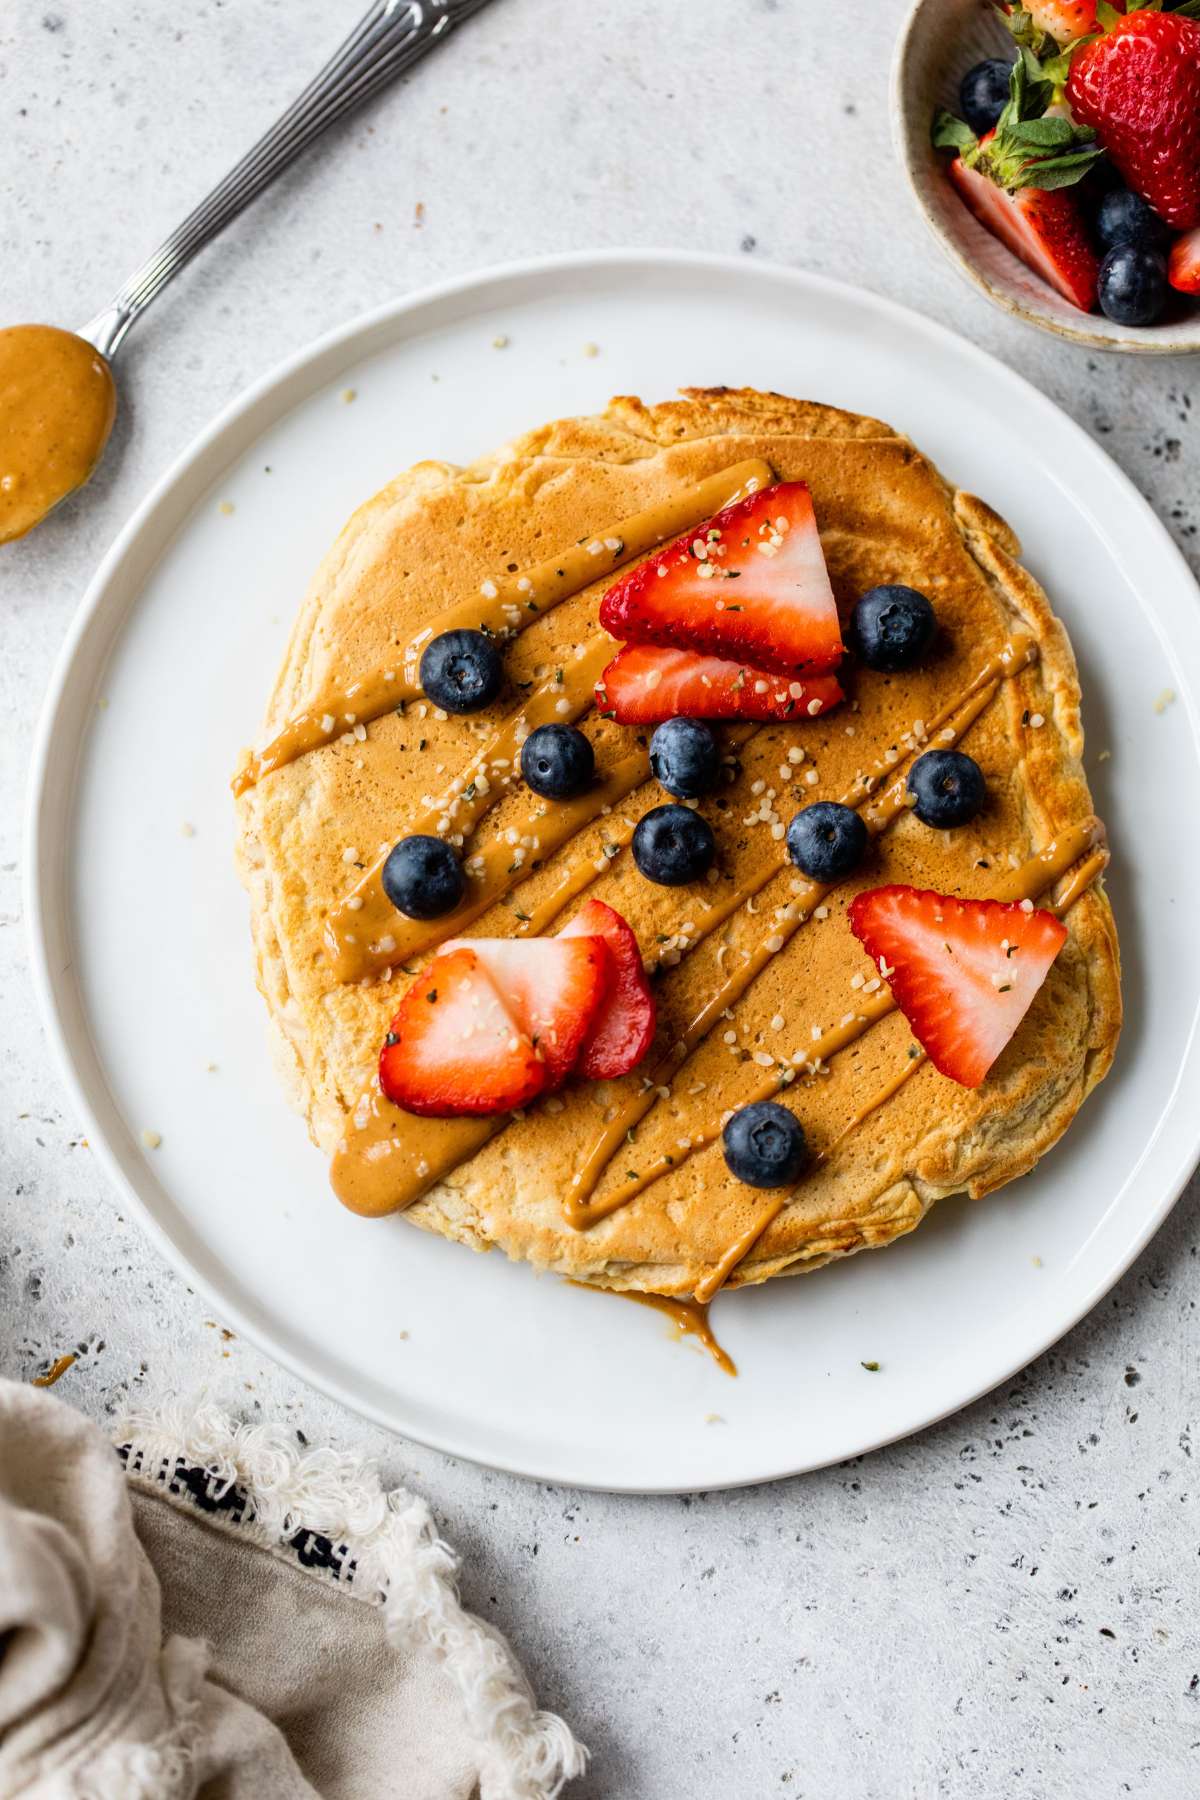 Pancake served on a white plate with peanut butter, strawberries and blueberries.